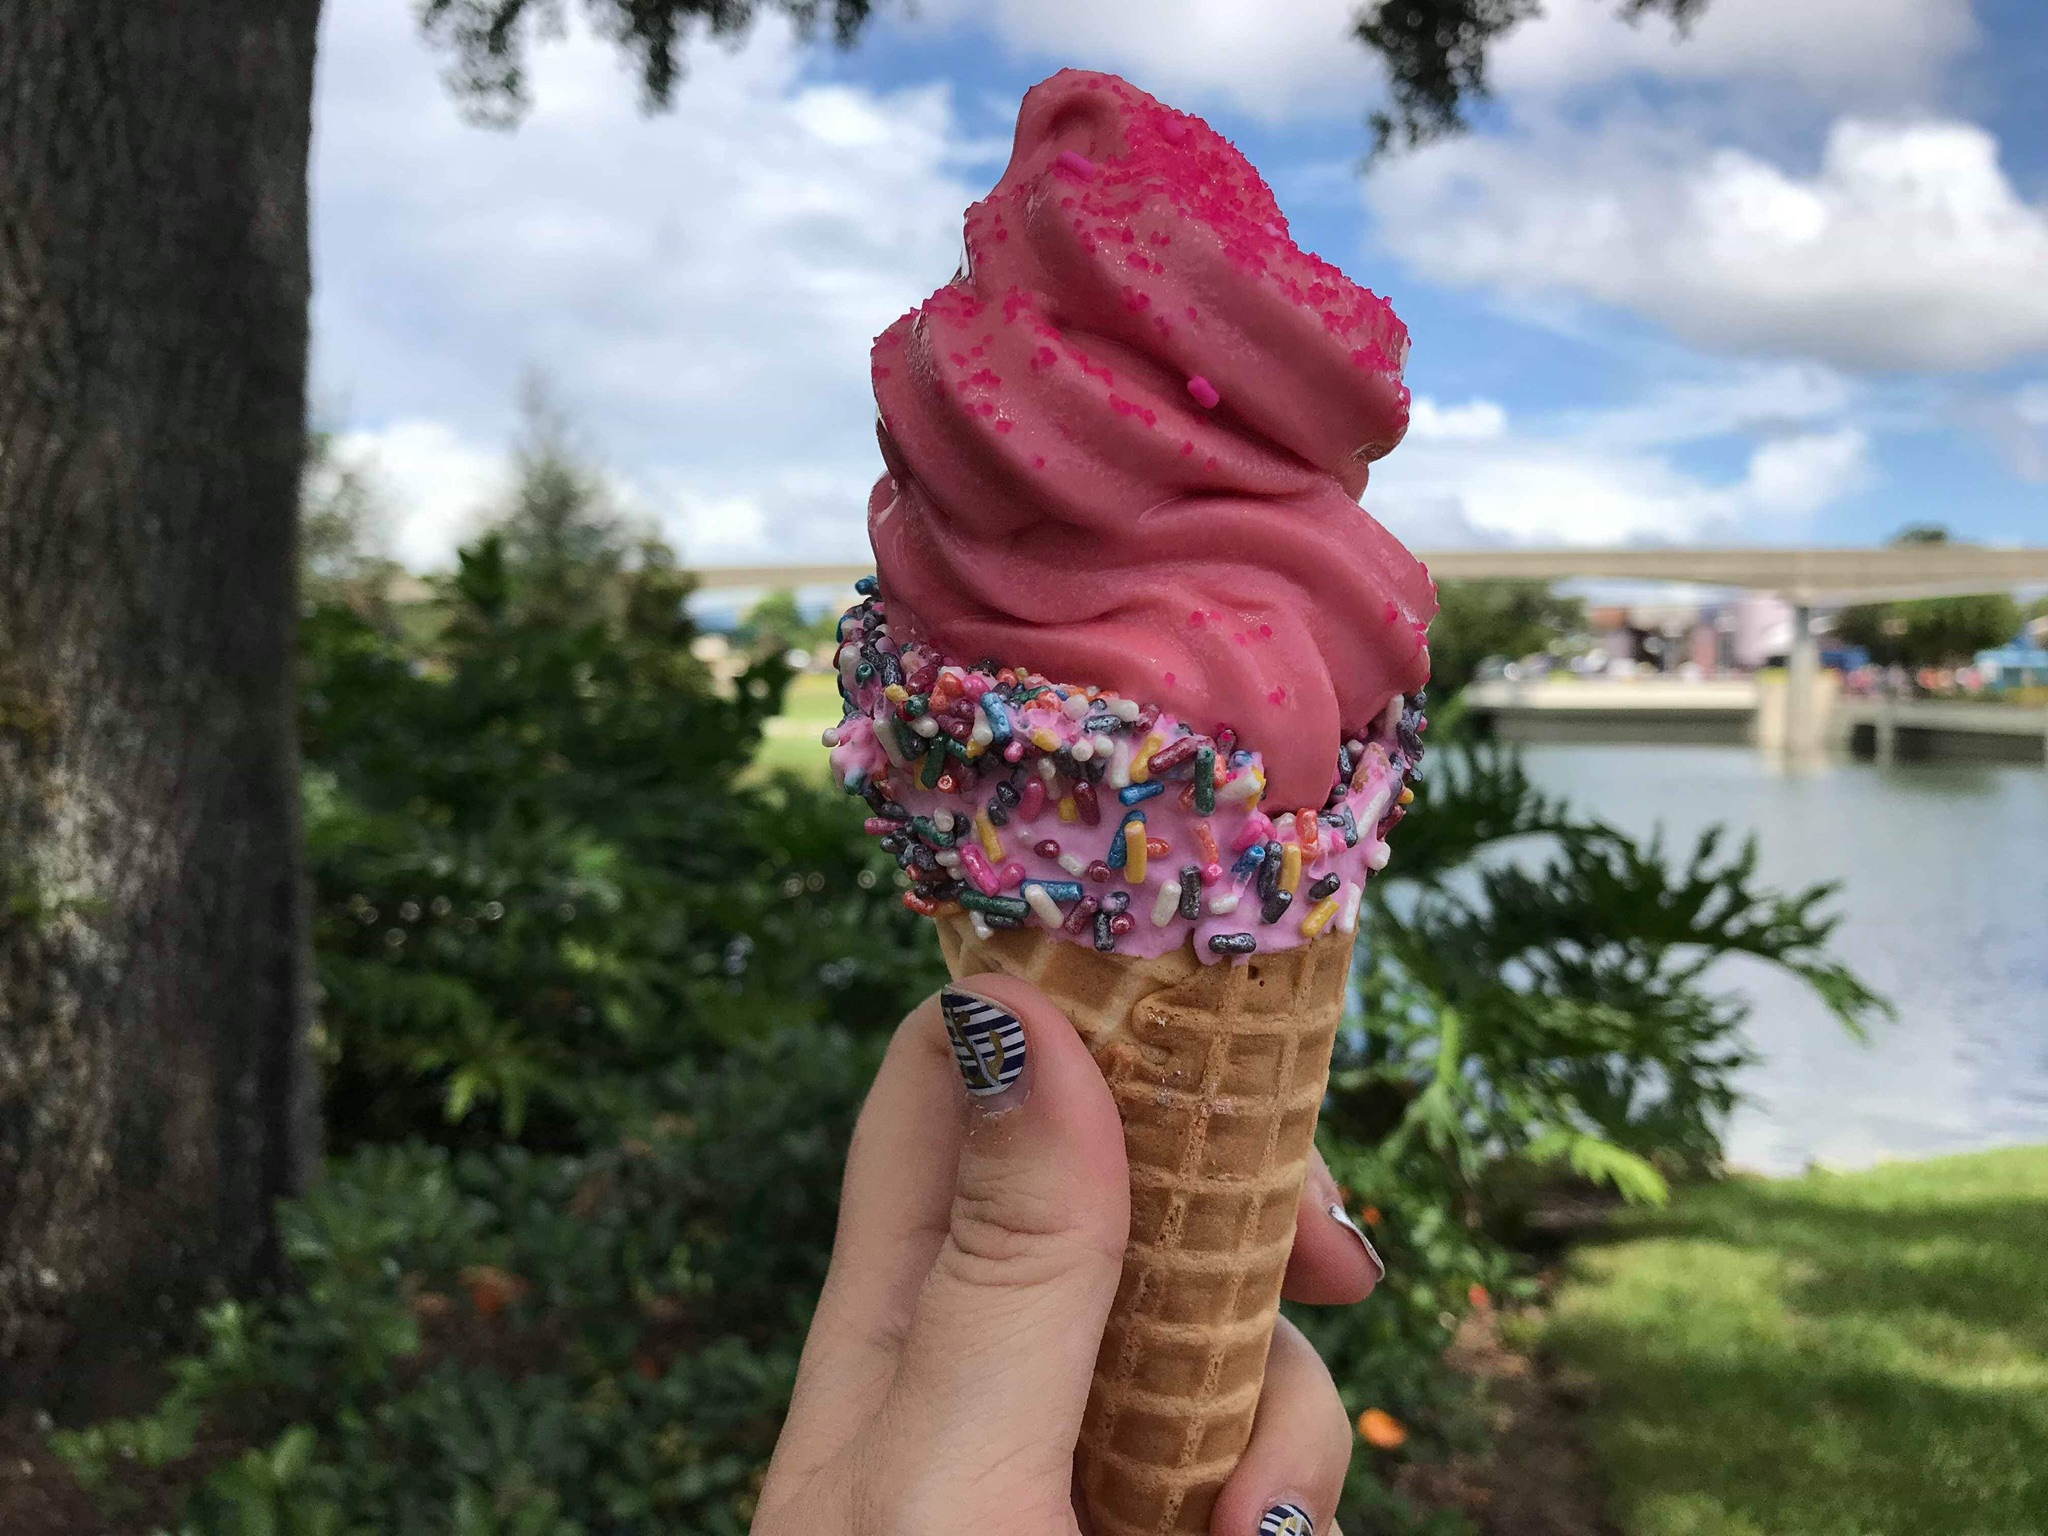 Shimmering Sips Strawberry Soft-Serve Cone At Epcot’s Food and Wine Festival